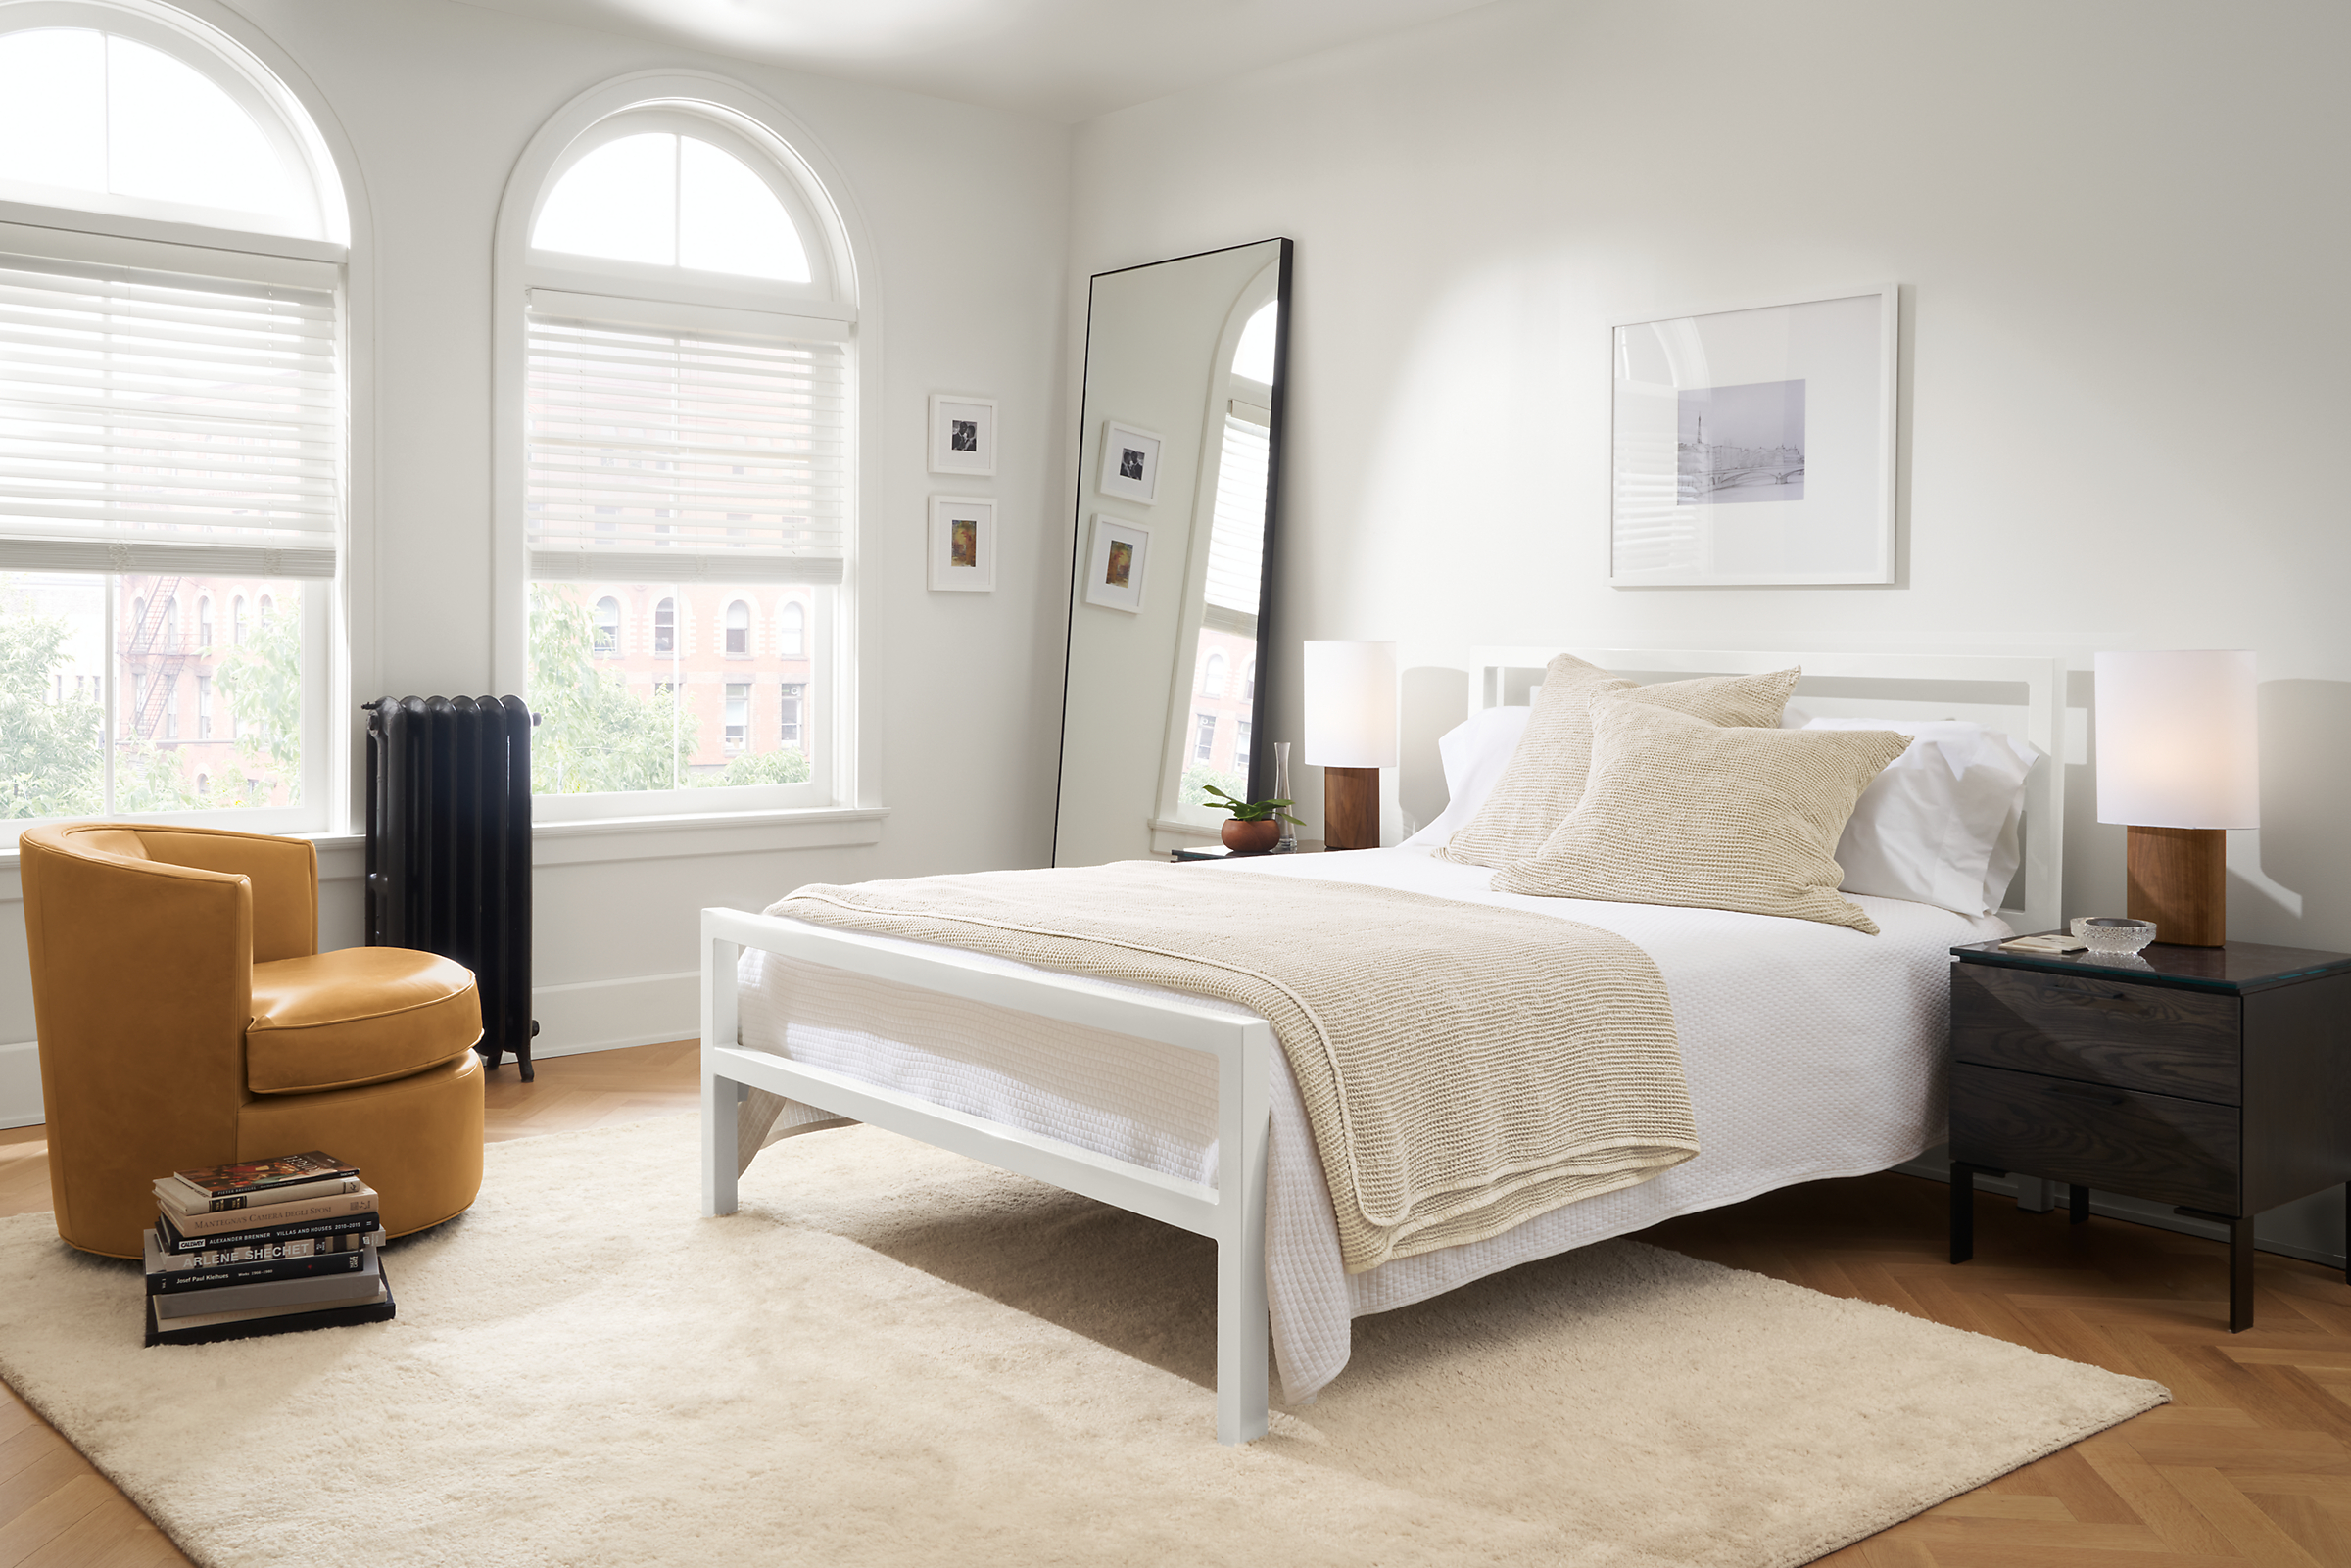 bedroom with parsons bed in white, otis leather swivel chair, aram rug.